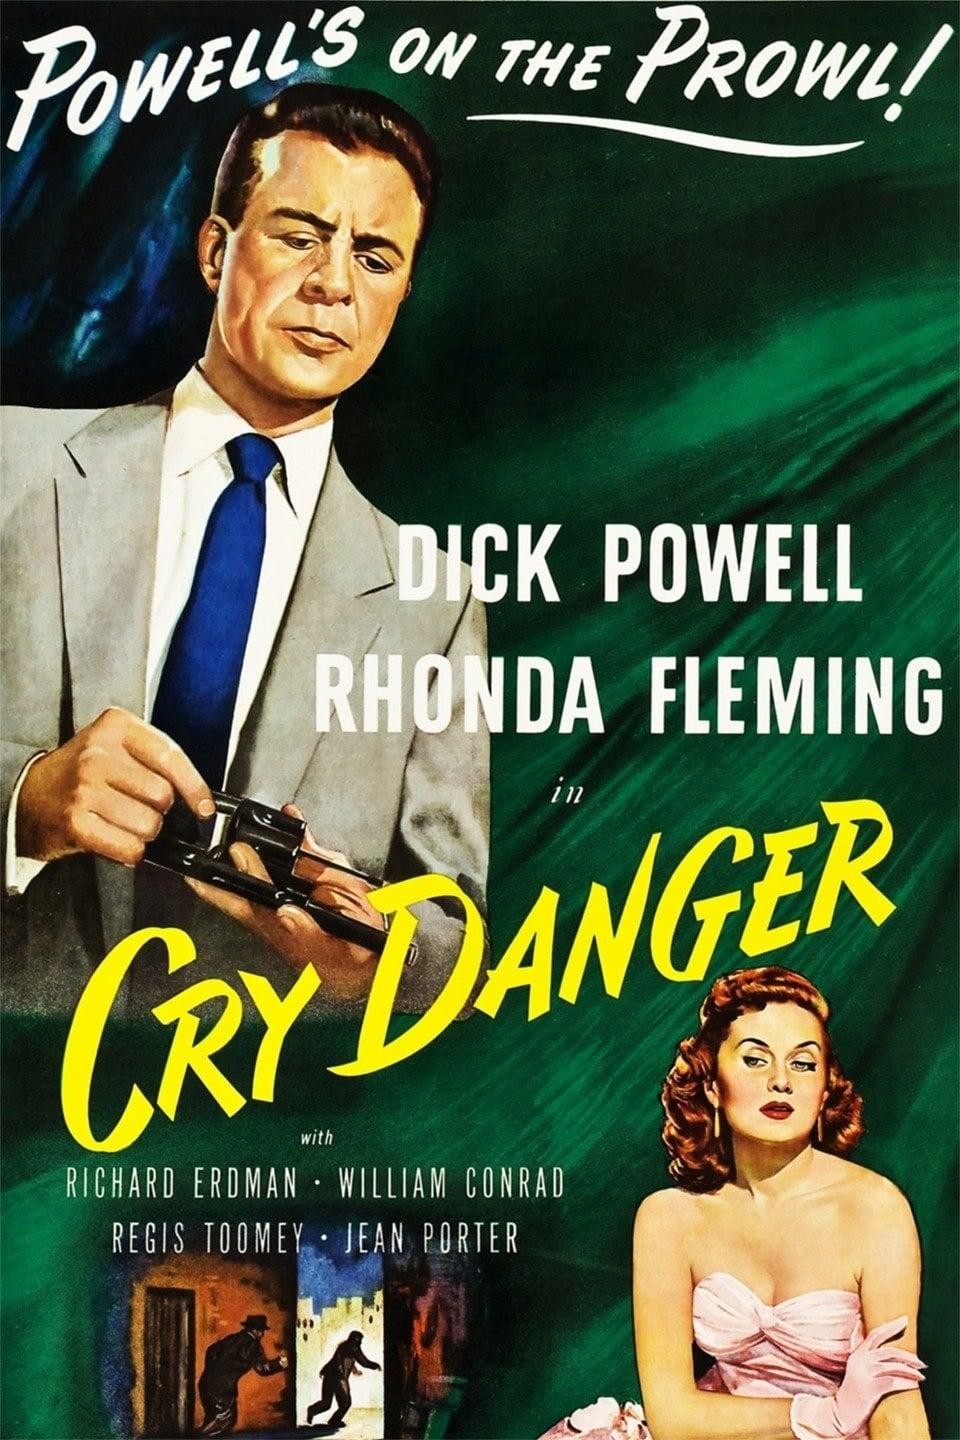 Cry Danger poster